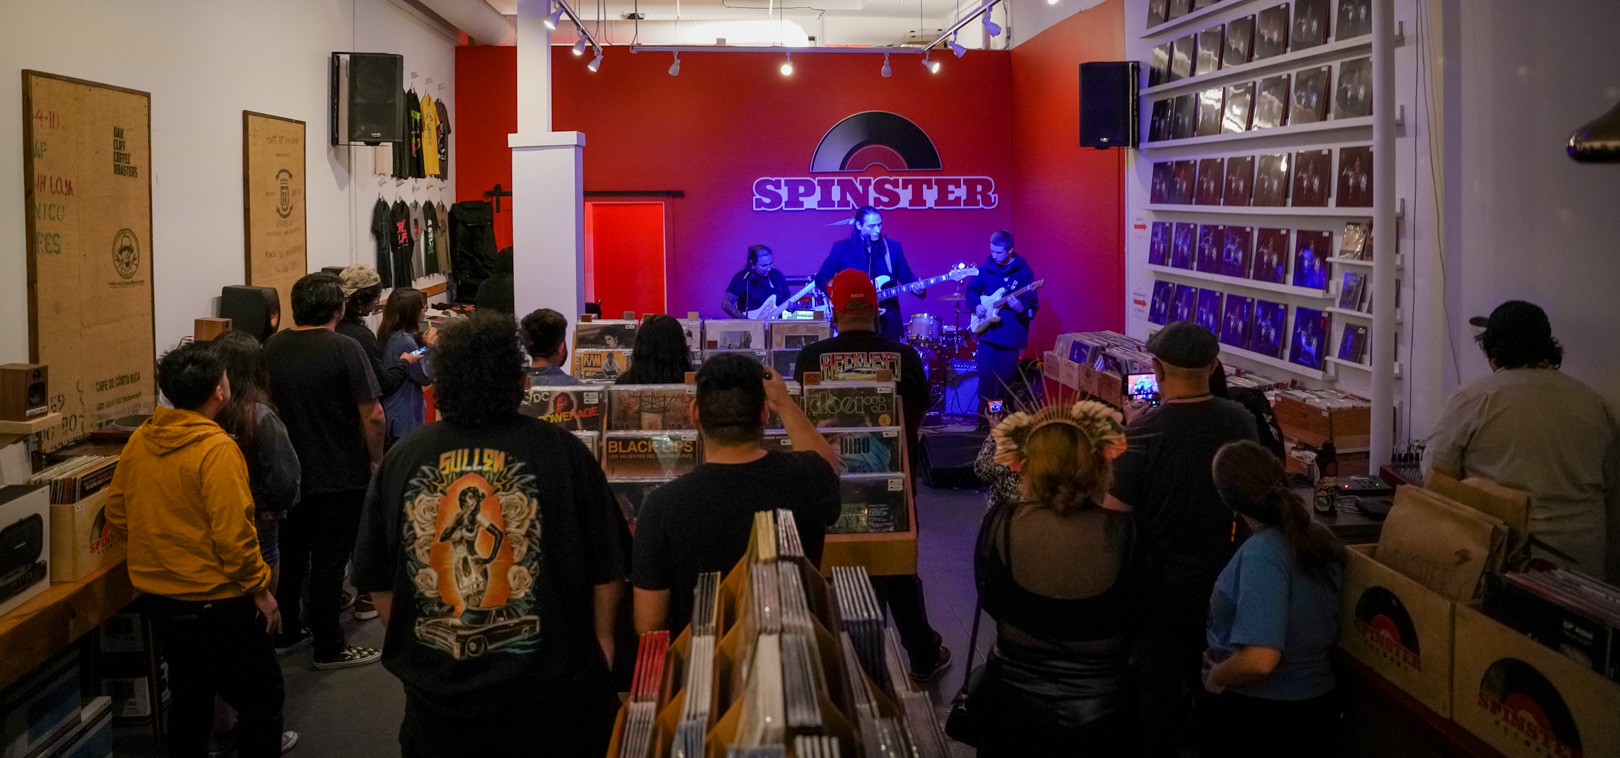 A band on stage inside a record shop